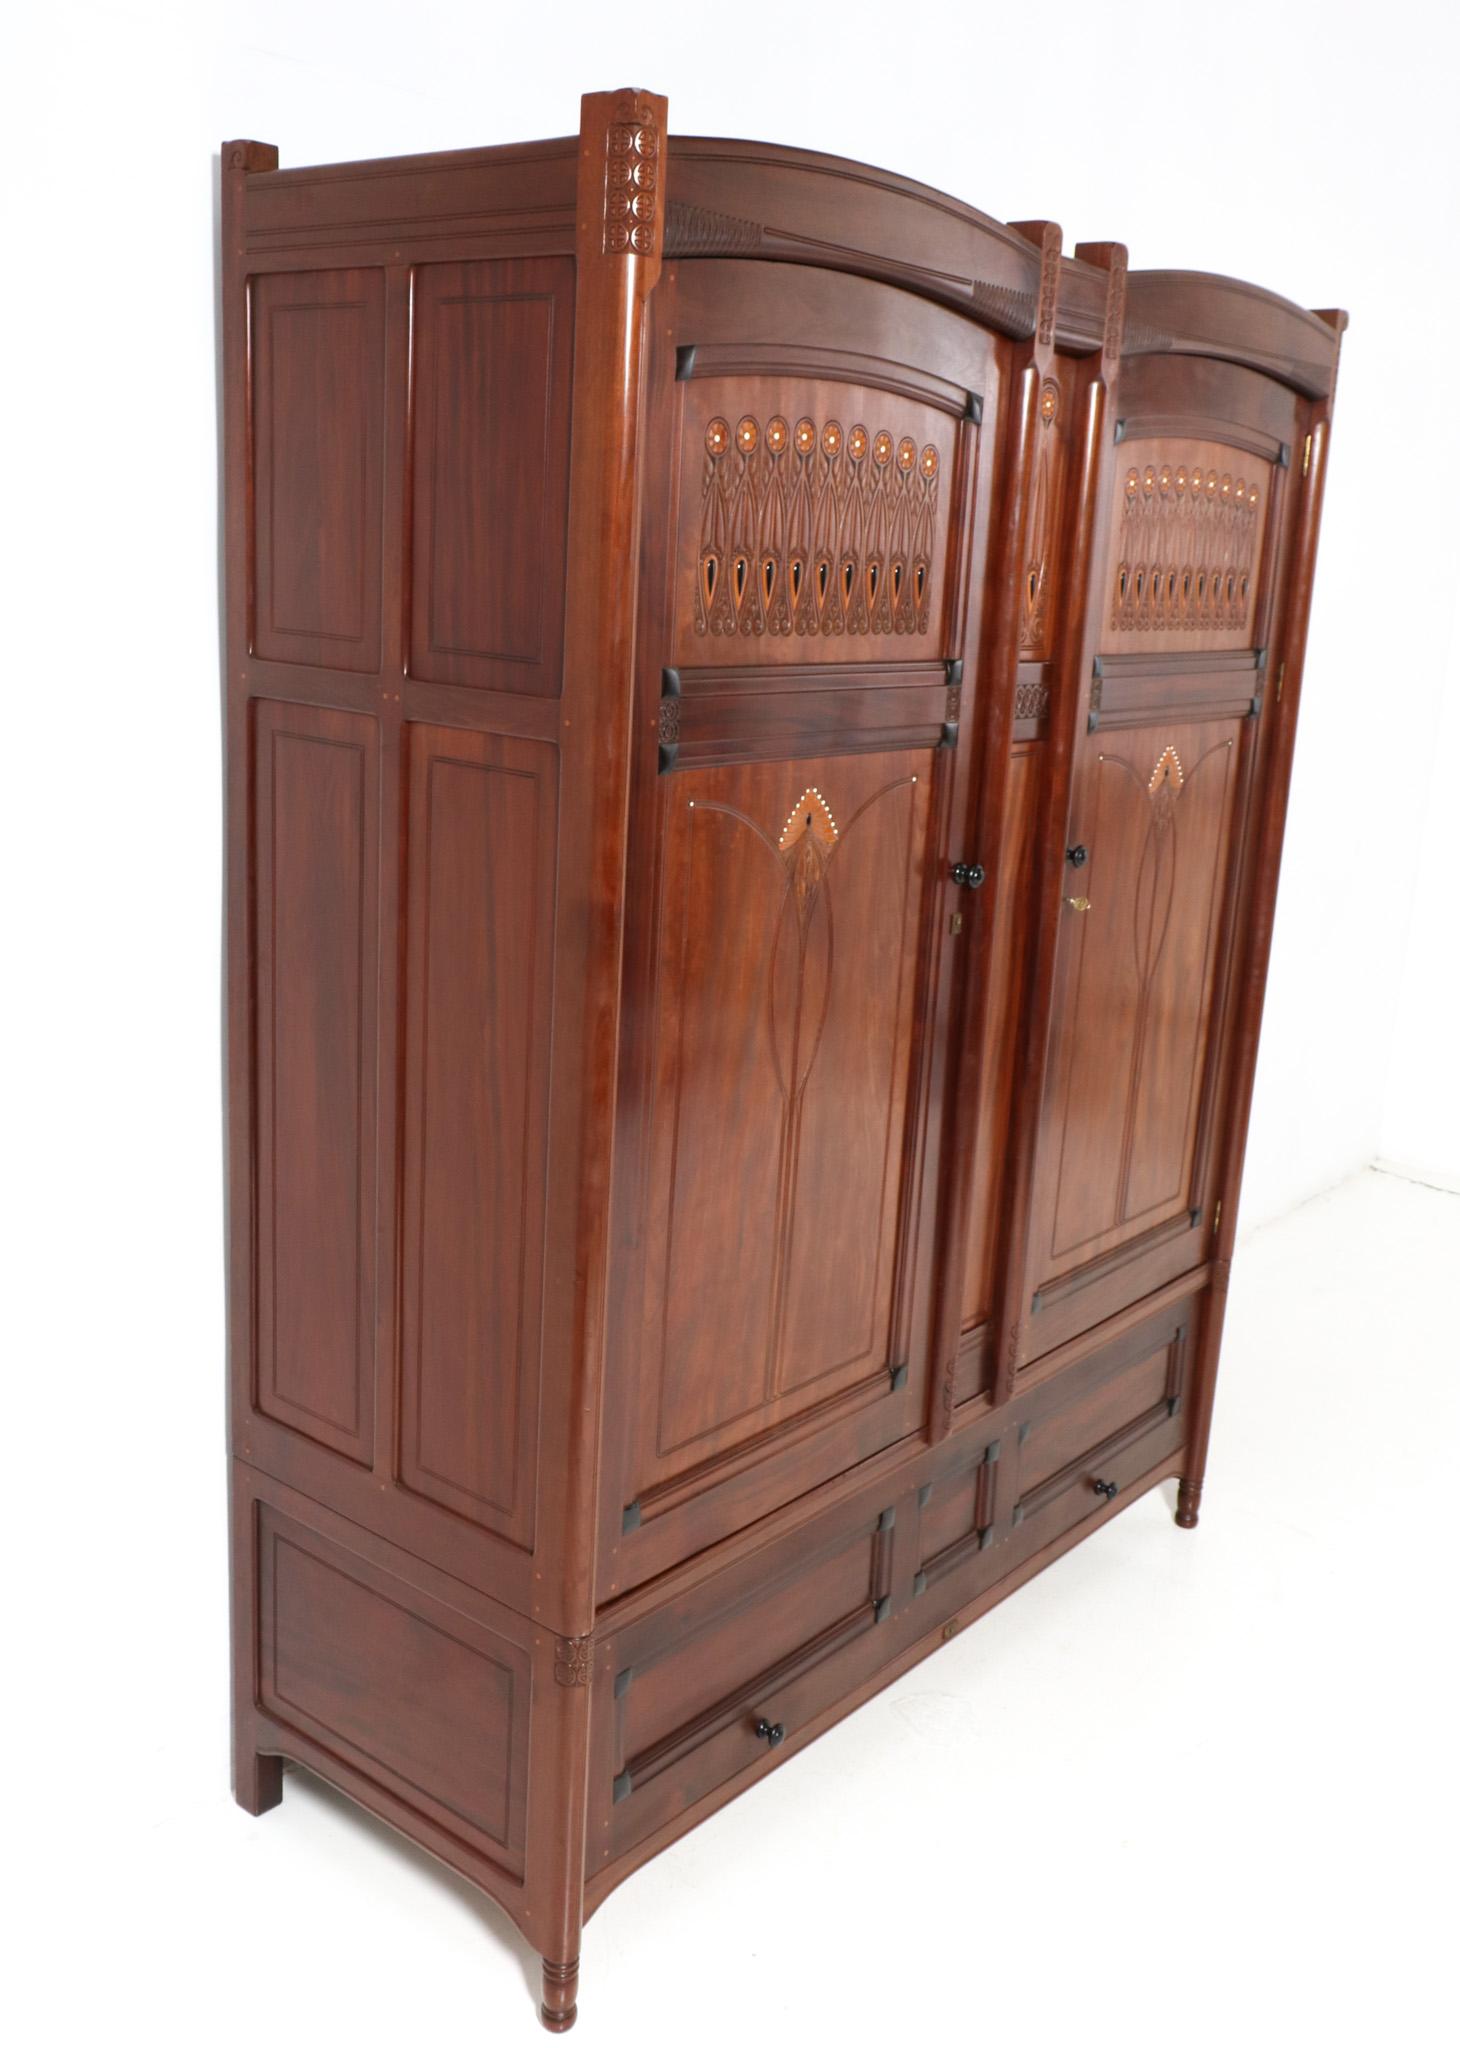  Arts & Crafts Armoire or Wardrobe by Jac. van den Bosch for 't Binnenhuis, 1910 In Good Condition For Sale In Amsterdam, NL